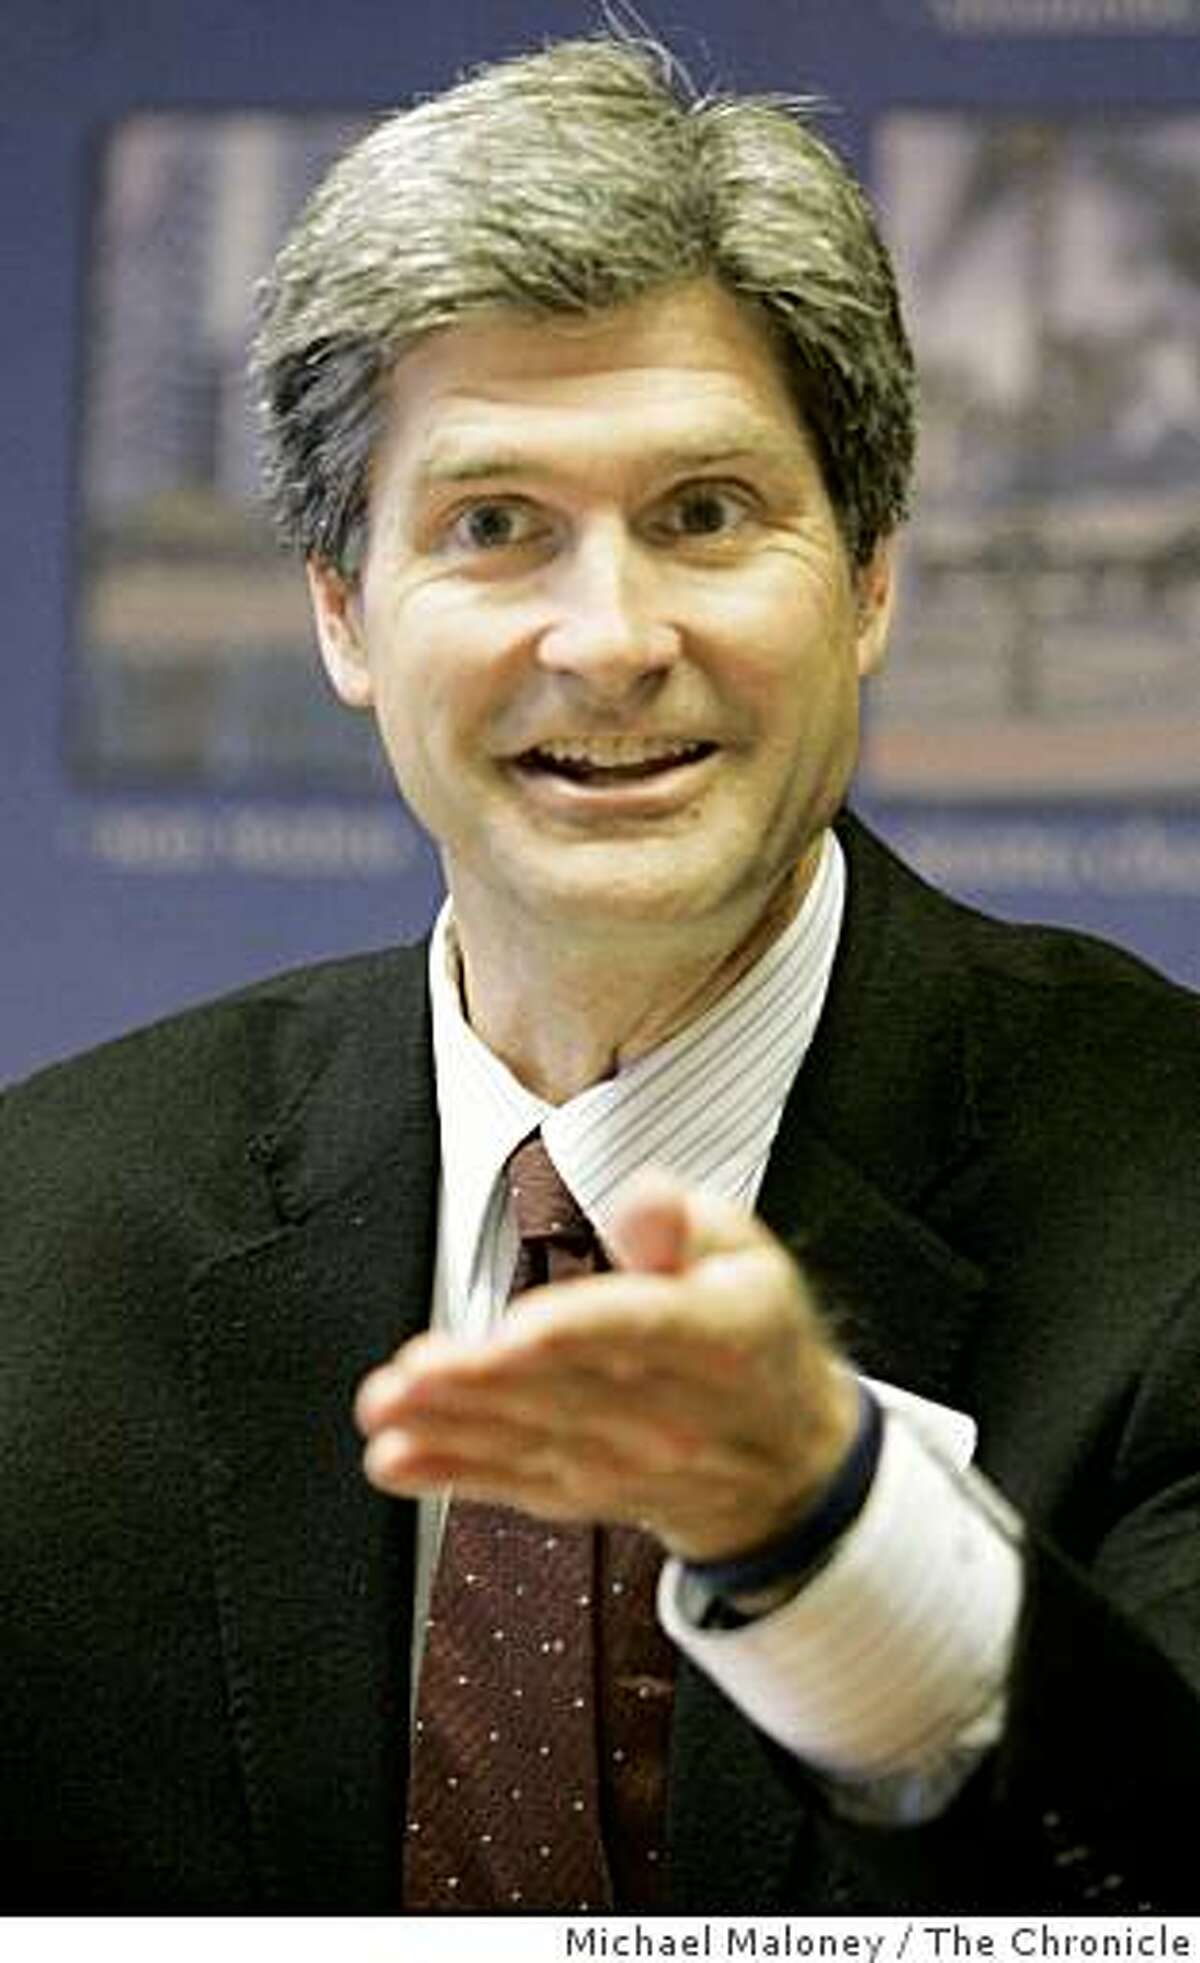 Carl Guardino, president and CEO of the Silicon Valley Leadership Group talks with the Chronicle business reporters at the Chronicle offices on Thursday, April 19, 2007.